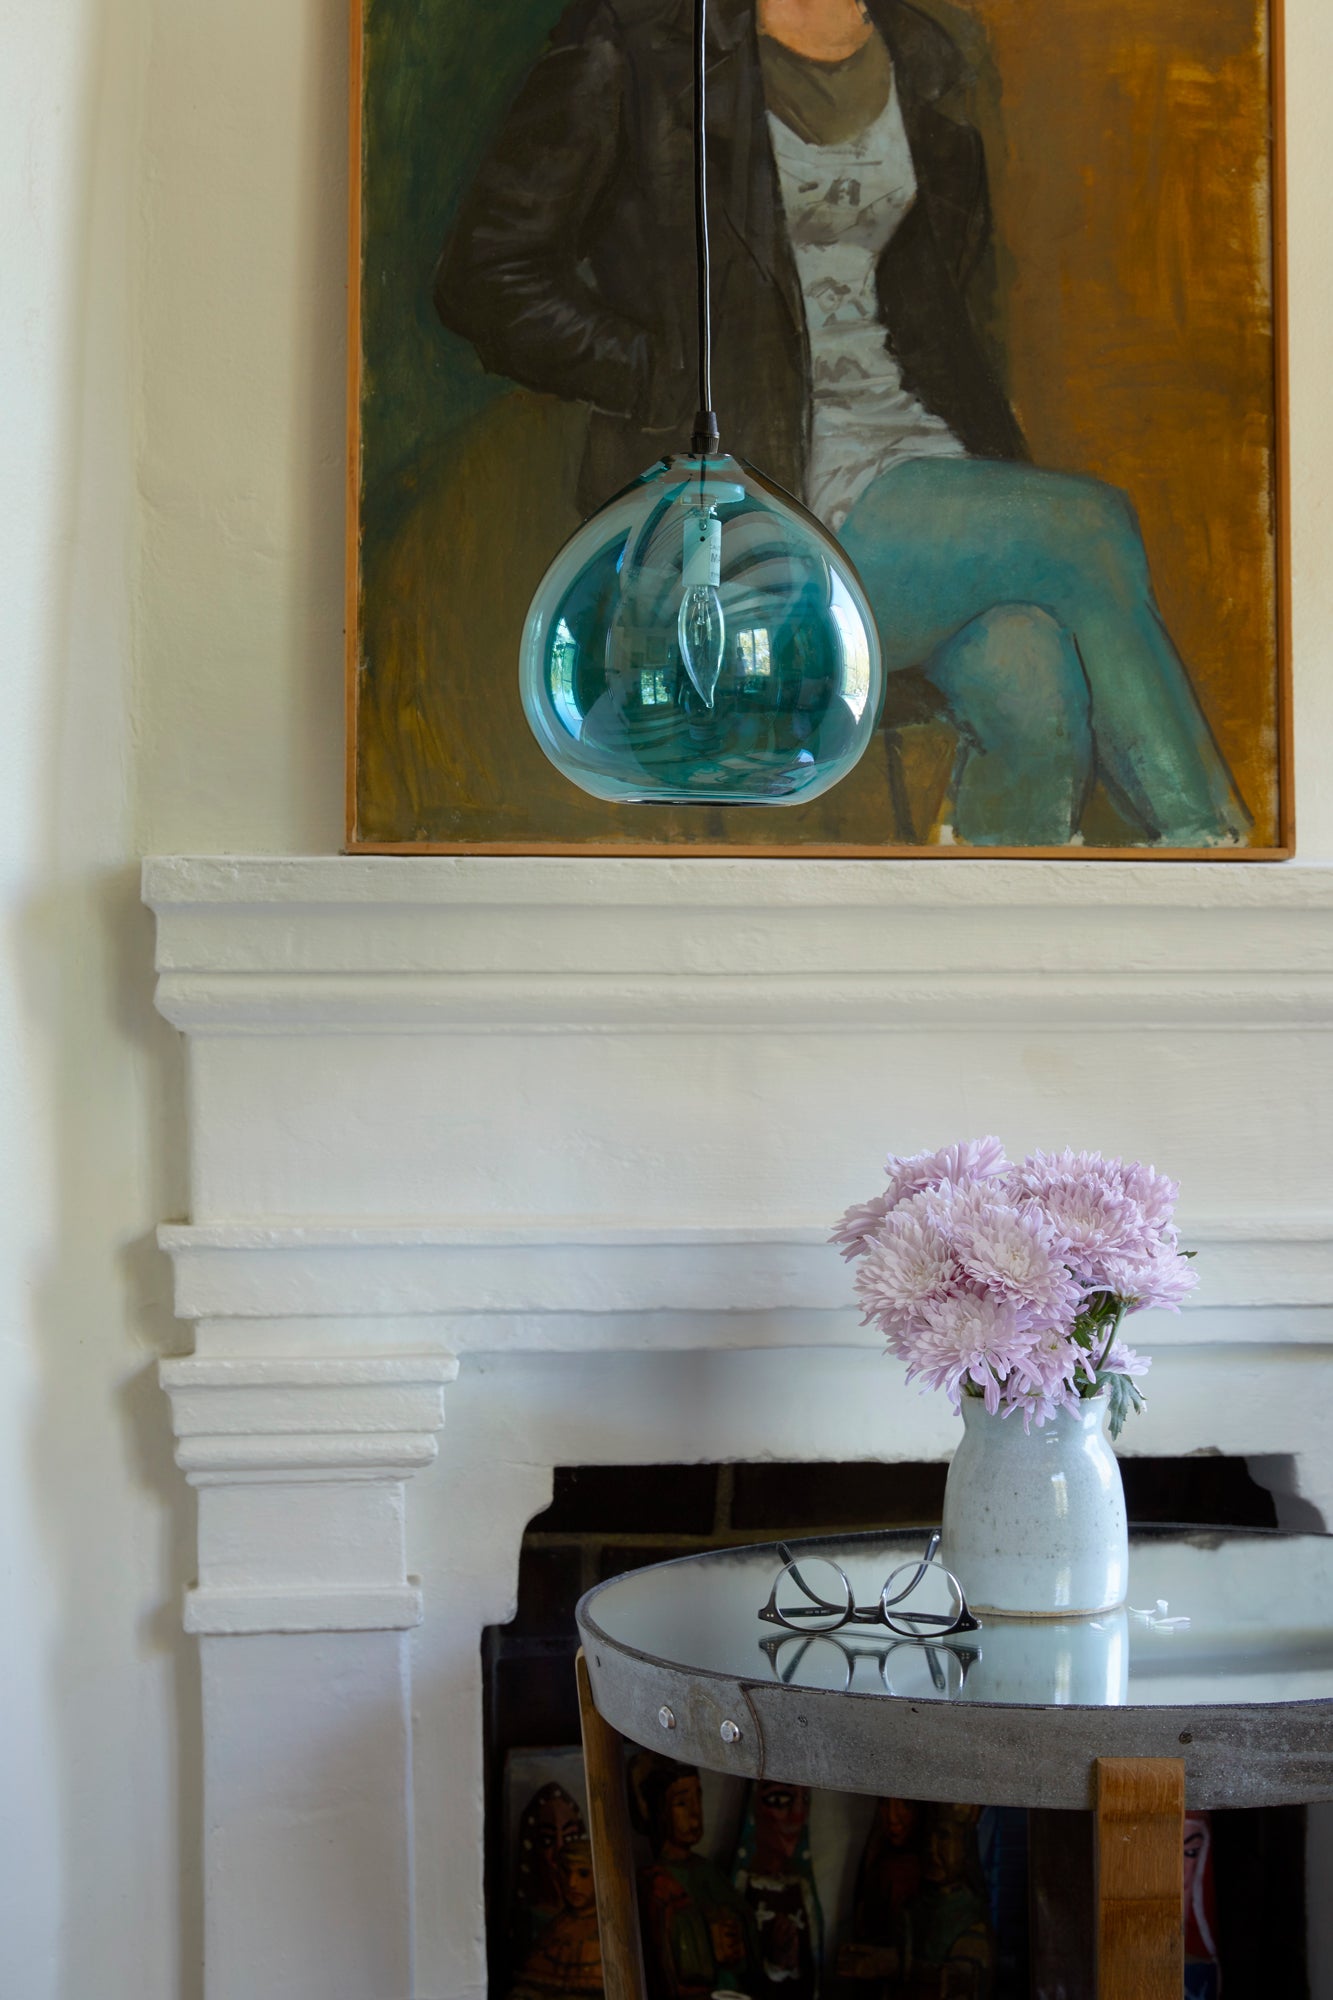  Teardrop pendant in turquoise hanging above winery side table in front of fire place with artwork on mantel. 